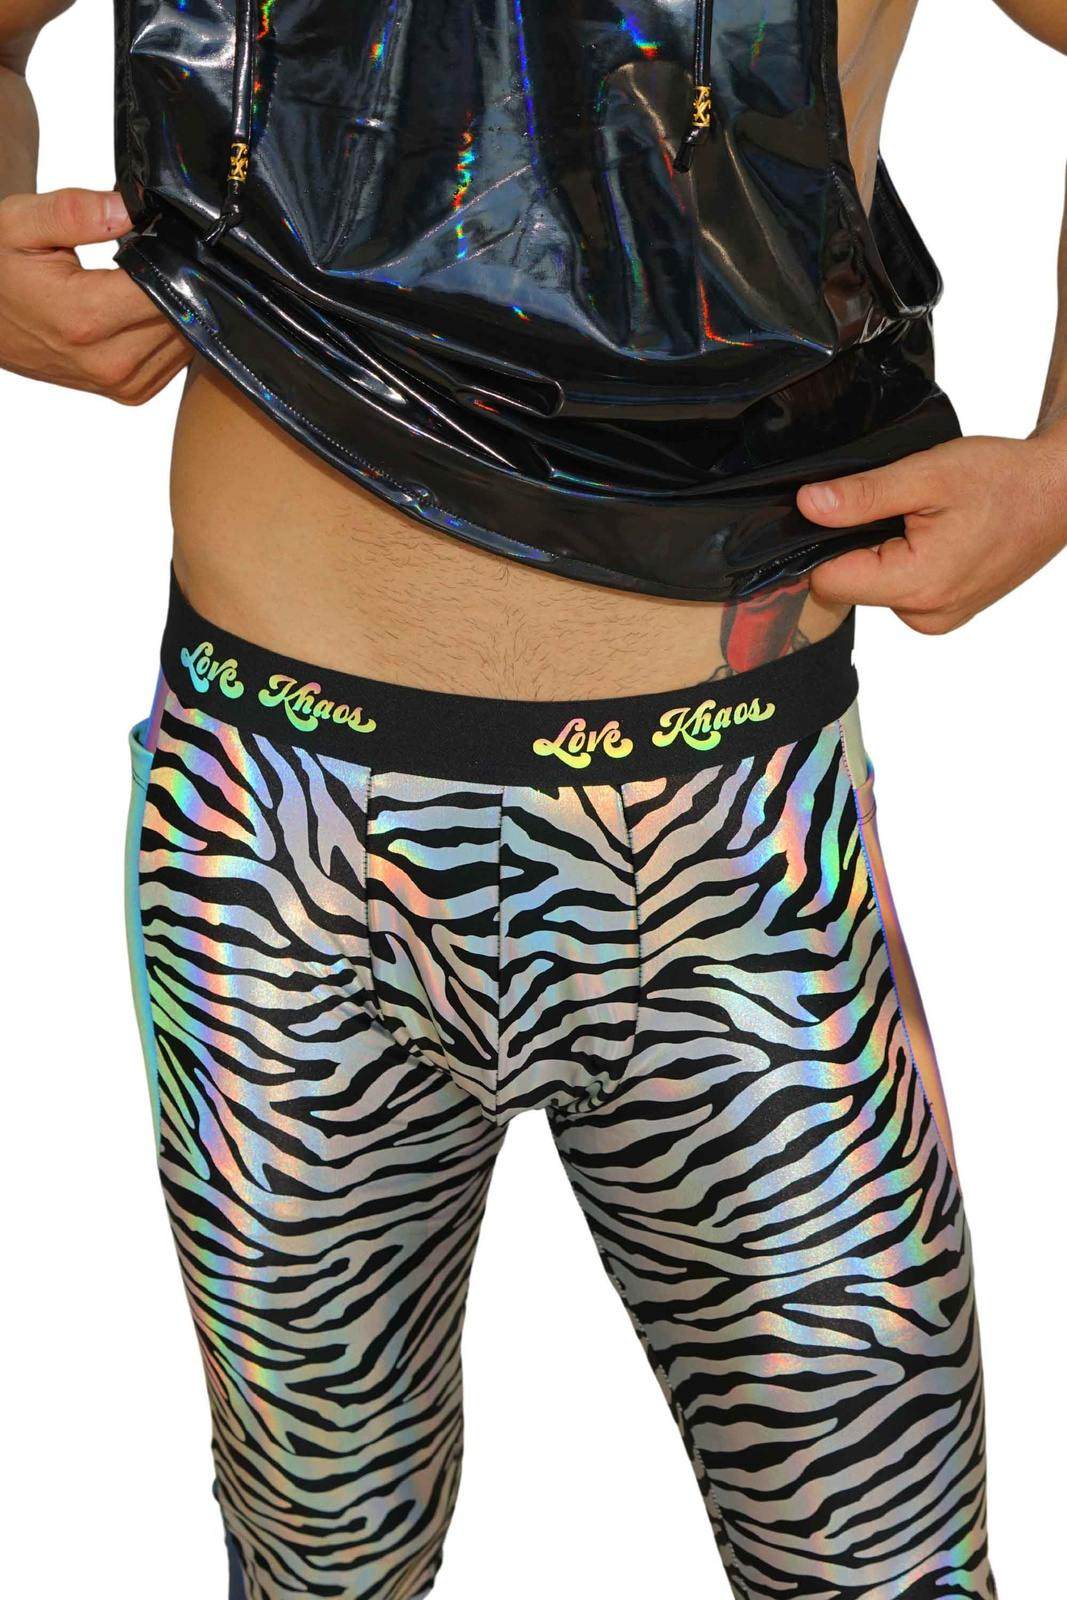 Mens Leggings with Pouch, Reflective Leggings